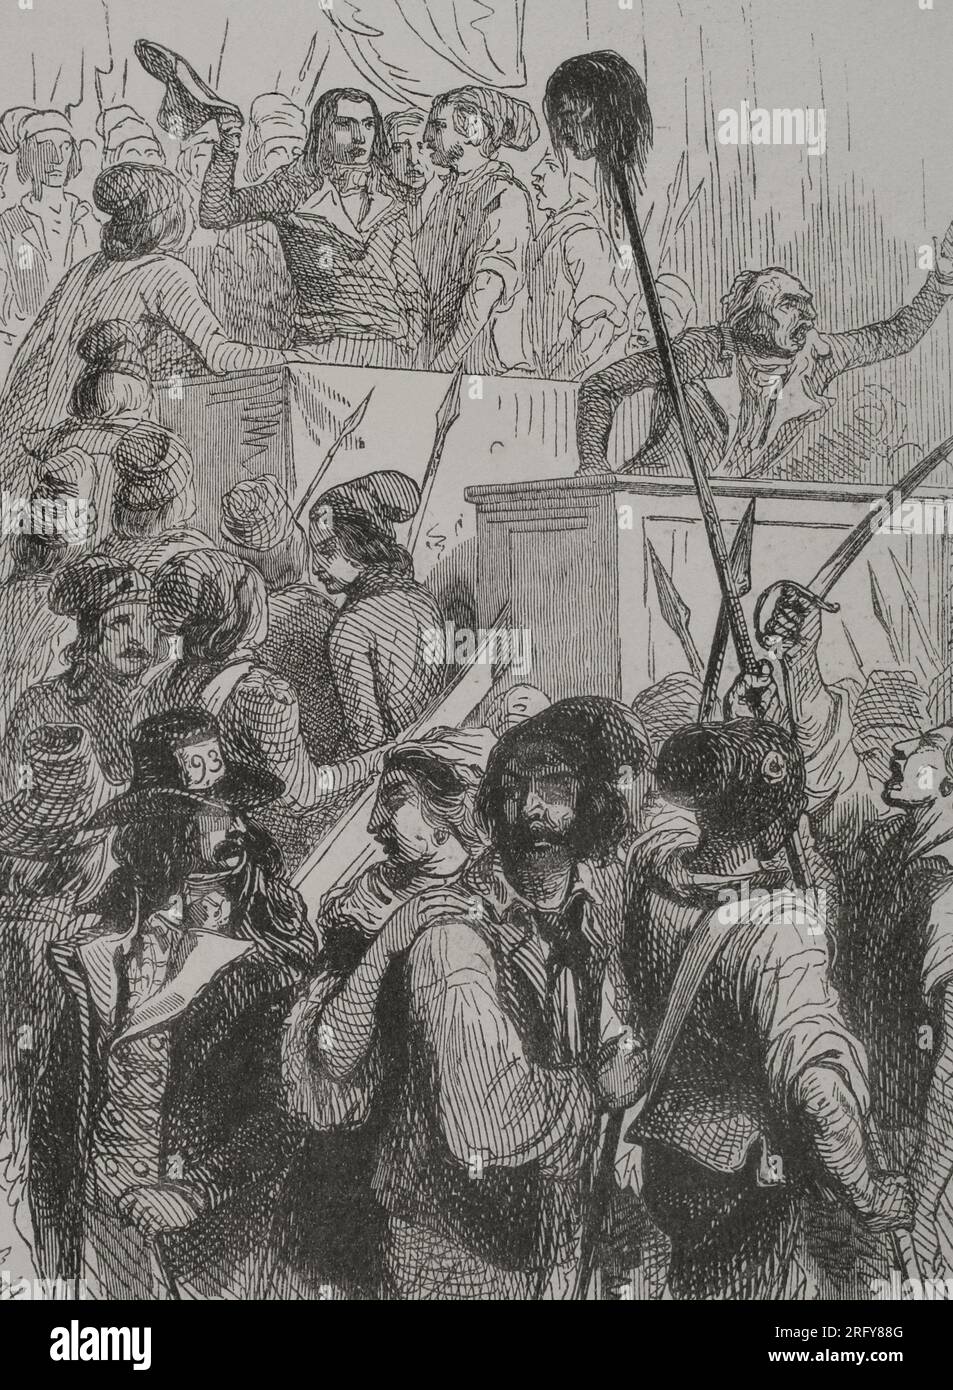 French Revolution. National Convention (1792-1794). It replaced the Legislative Assembly in September 1792, by universal suffrage, abolishing the monarchy and establishing a republic. Insurrectionists in the Assembly. Engraving. 'Los Héroes y las Grandezas de la Tierra'. Volume V. 1855. Stock Photo